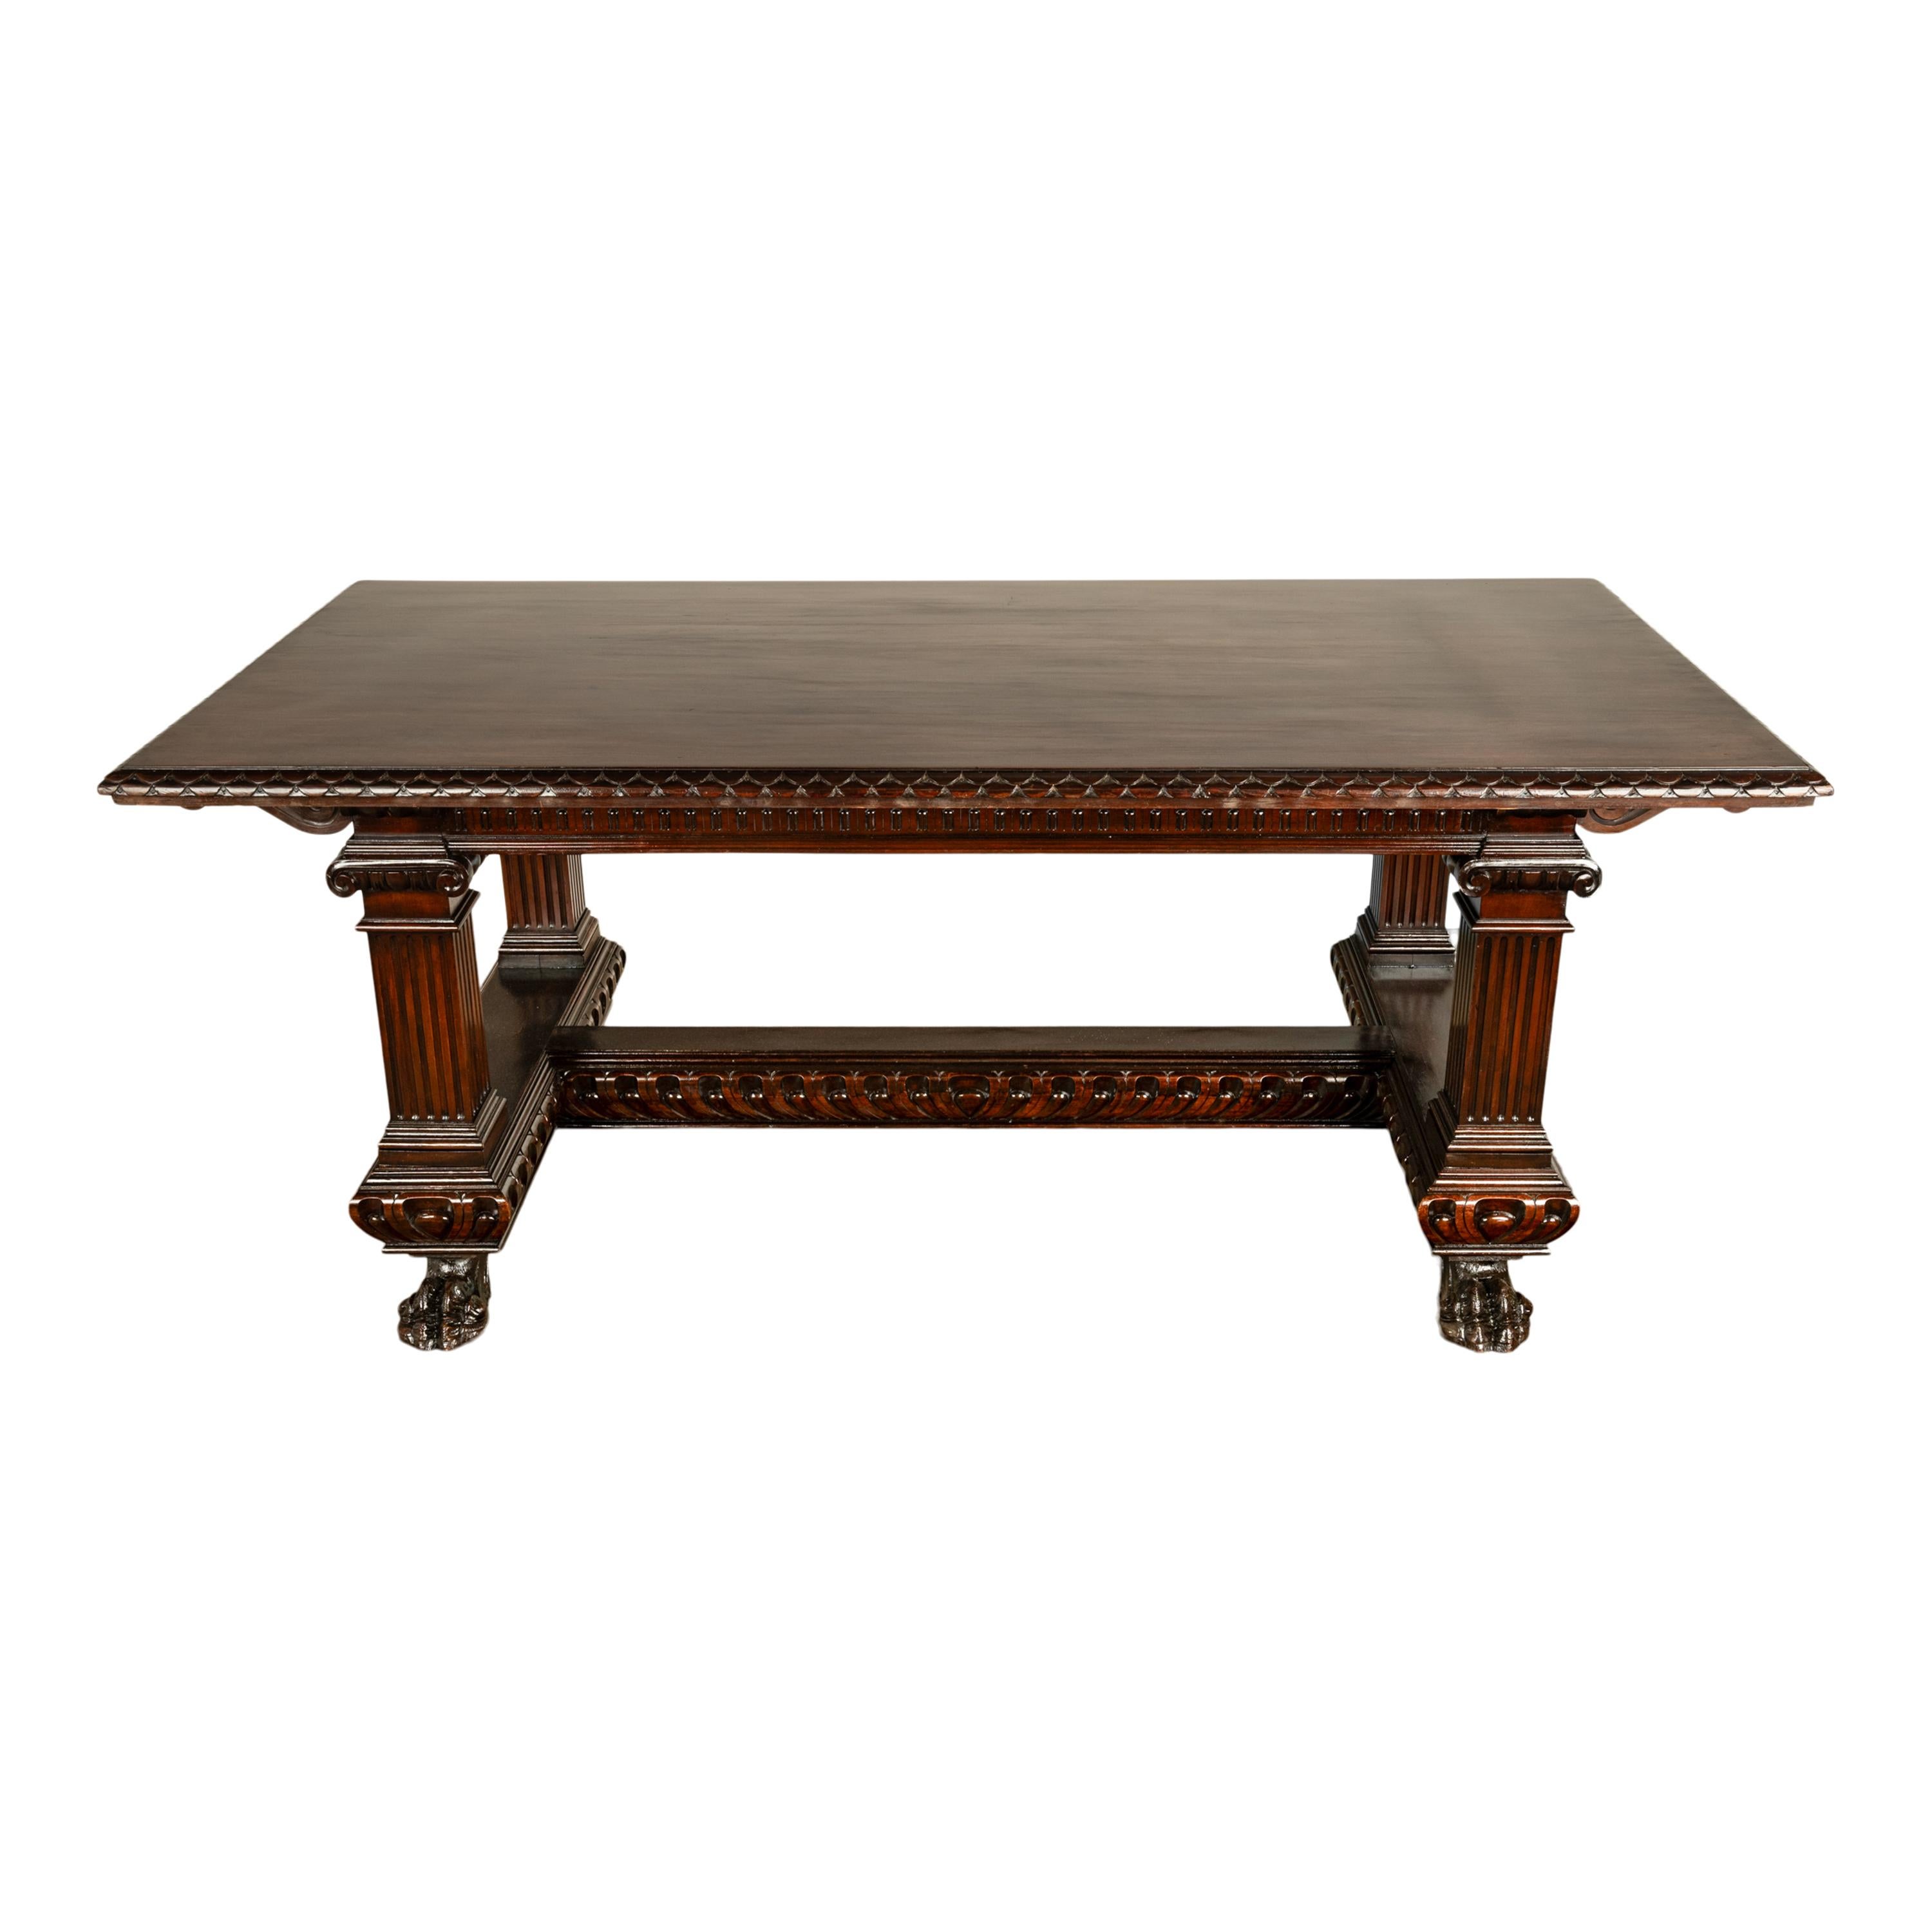 Antique Italian Carved Renaissance Revival Walnut Library Dining Table 1880 For Sale 7